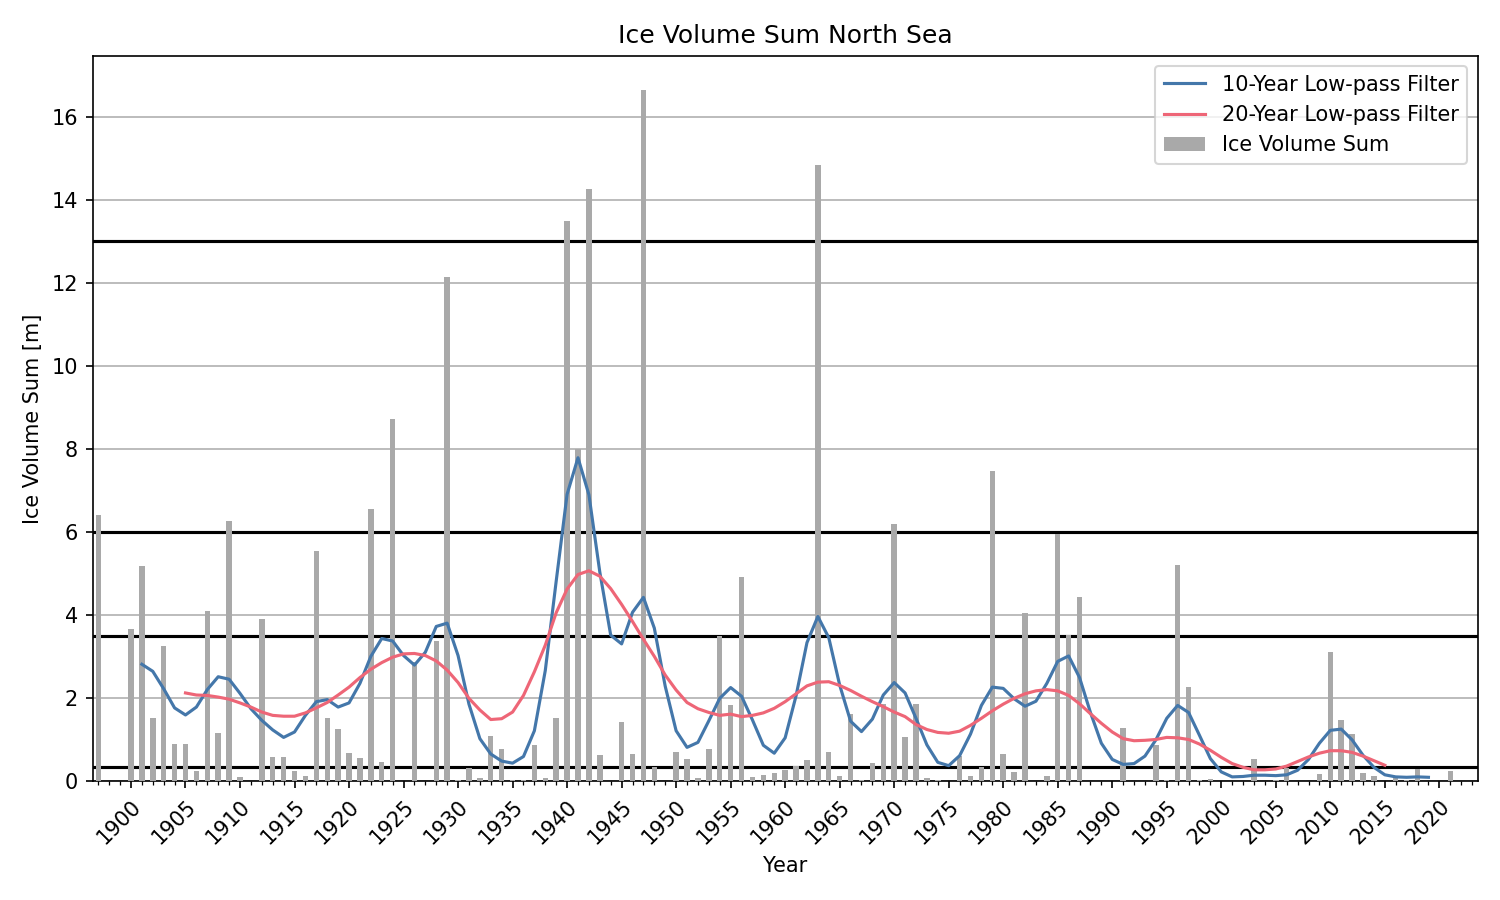 Time series of ice volume sum from 1897 for the North Sea.